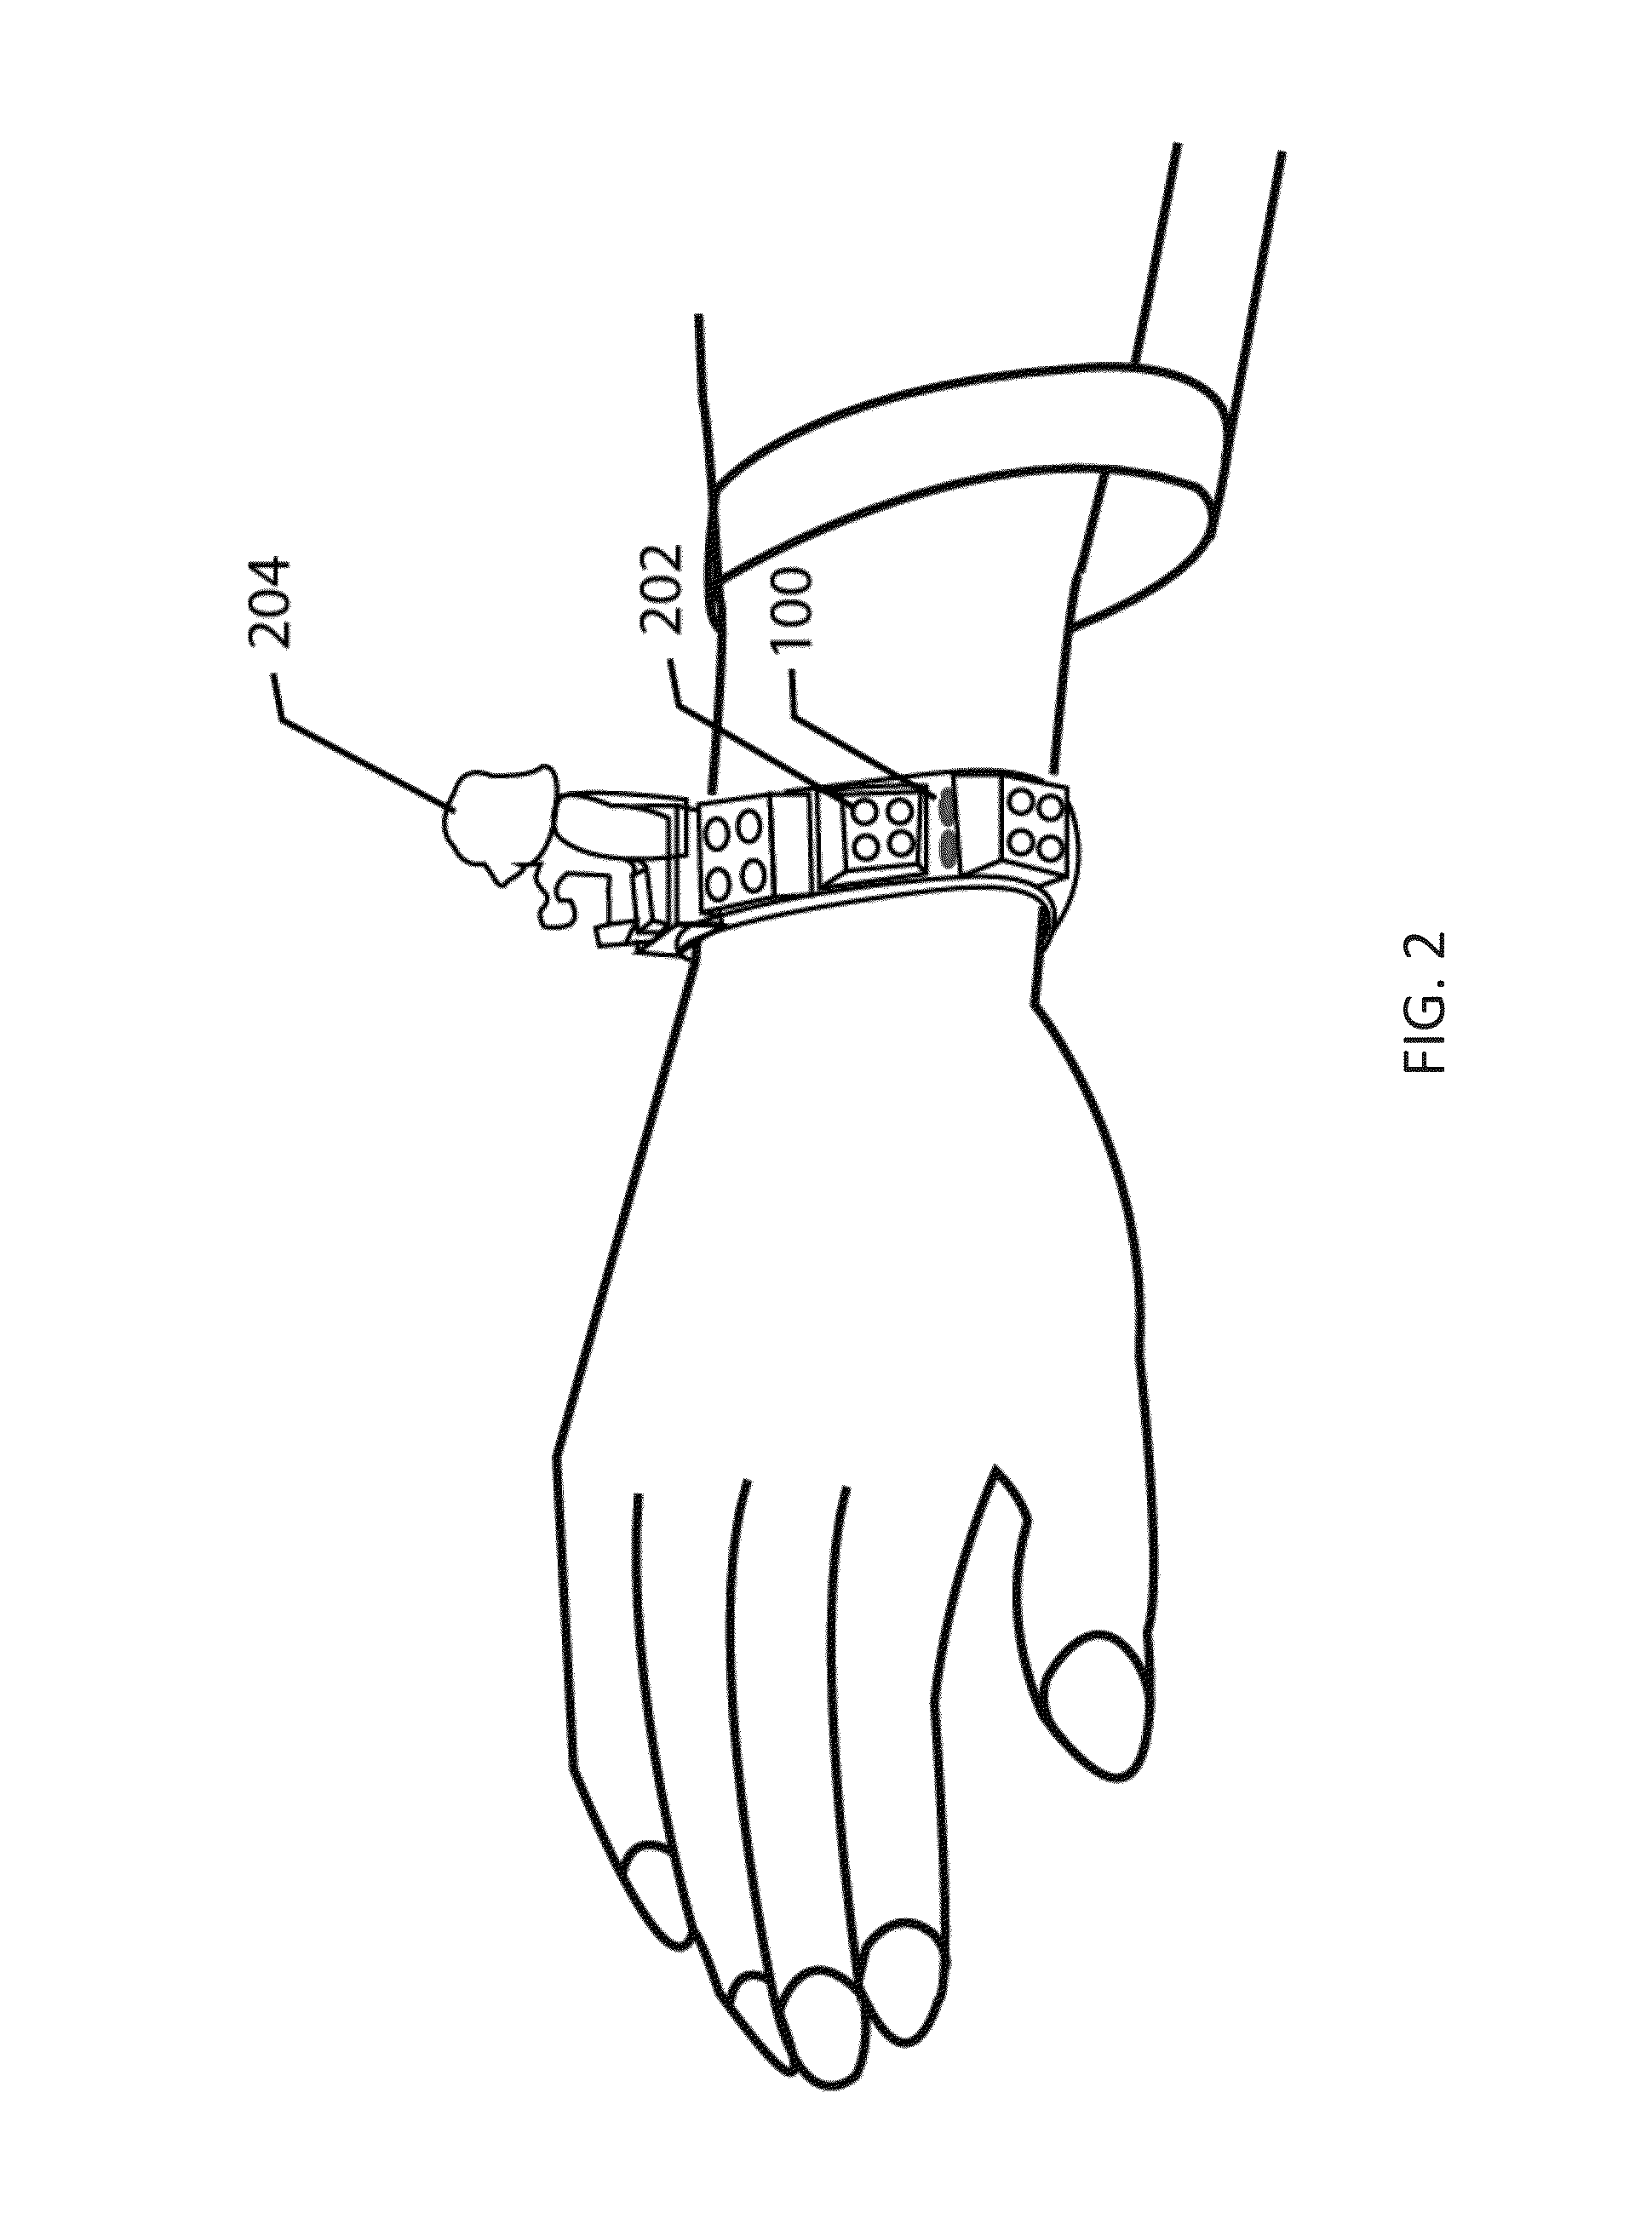 User configurable wearable device